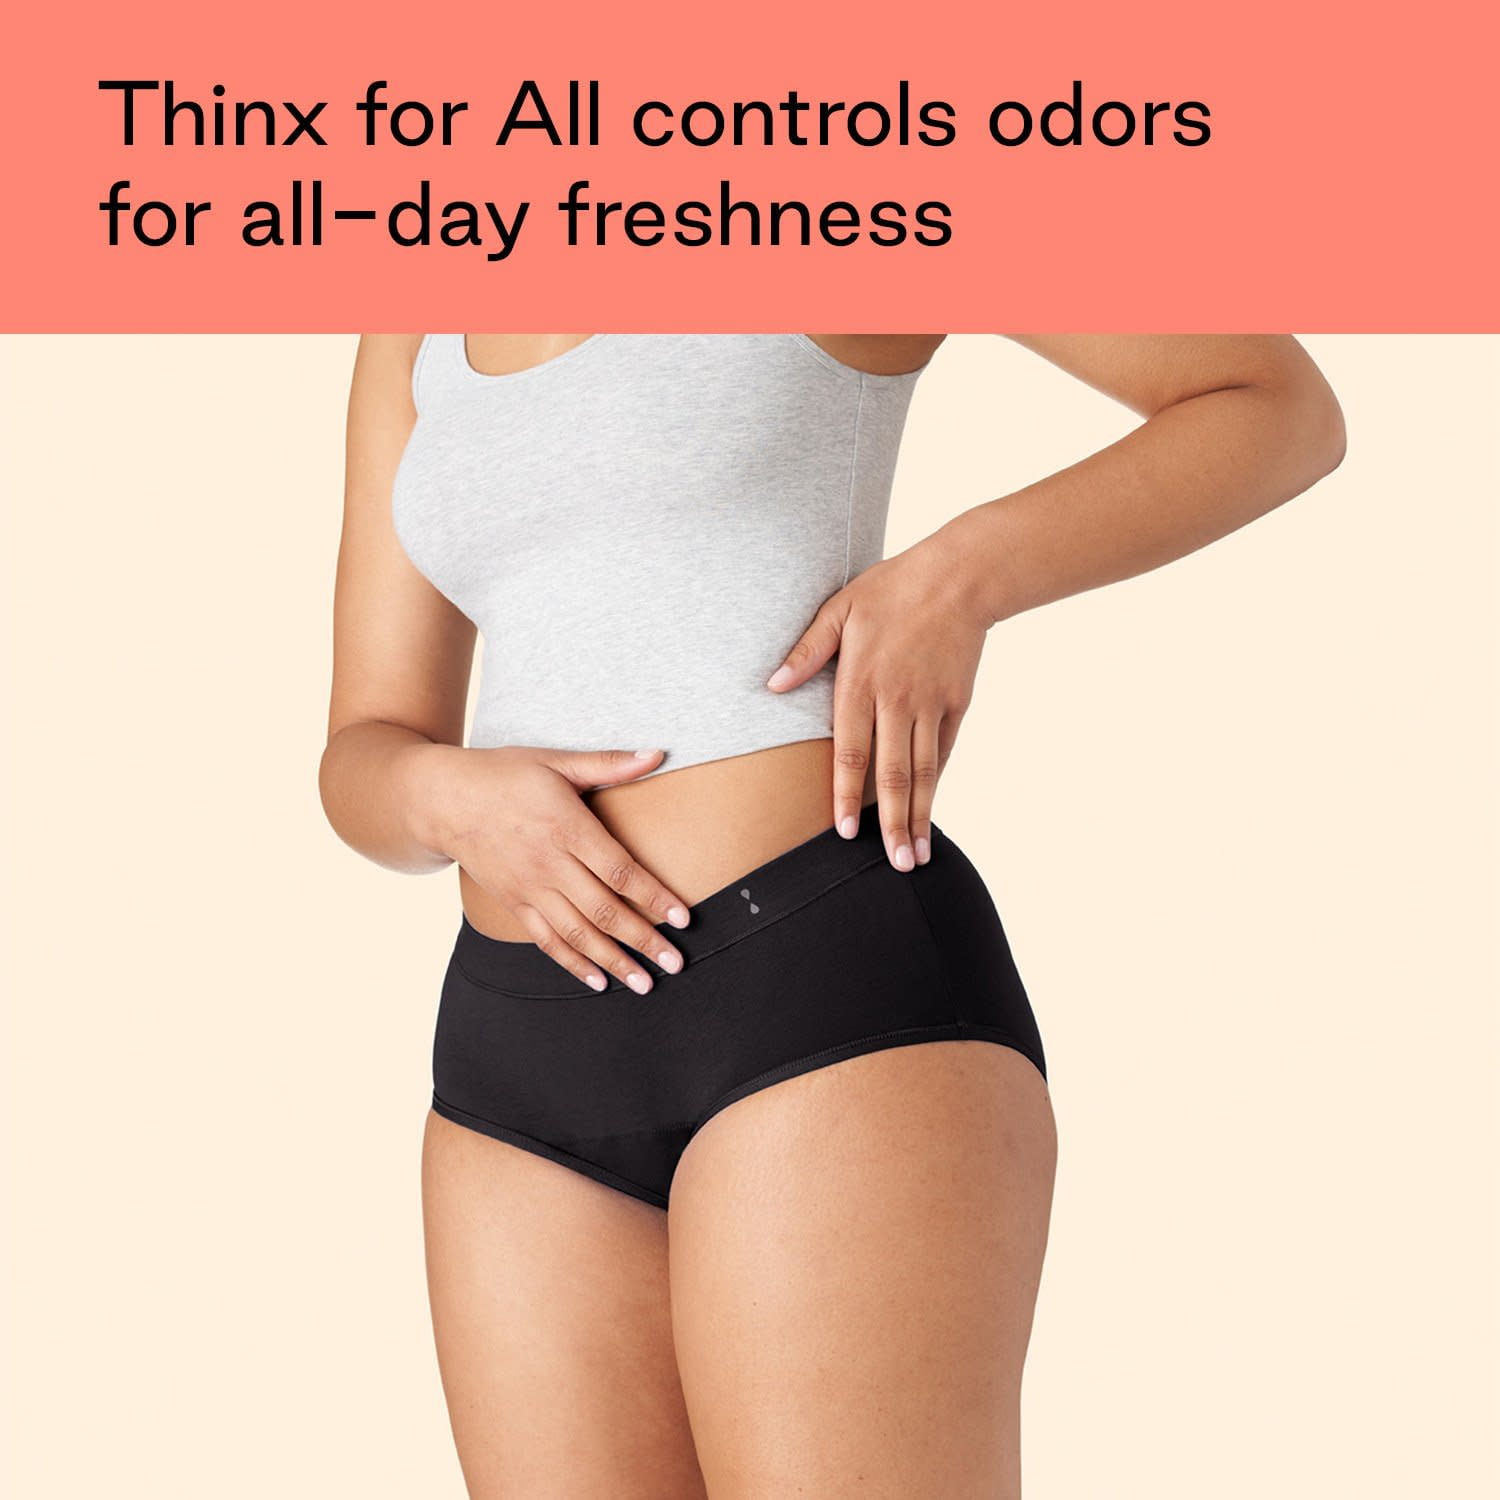 Thinx for All Cotton Brief Incontinence Underwear - Large - Black